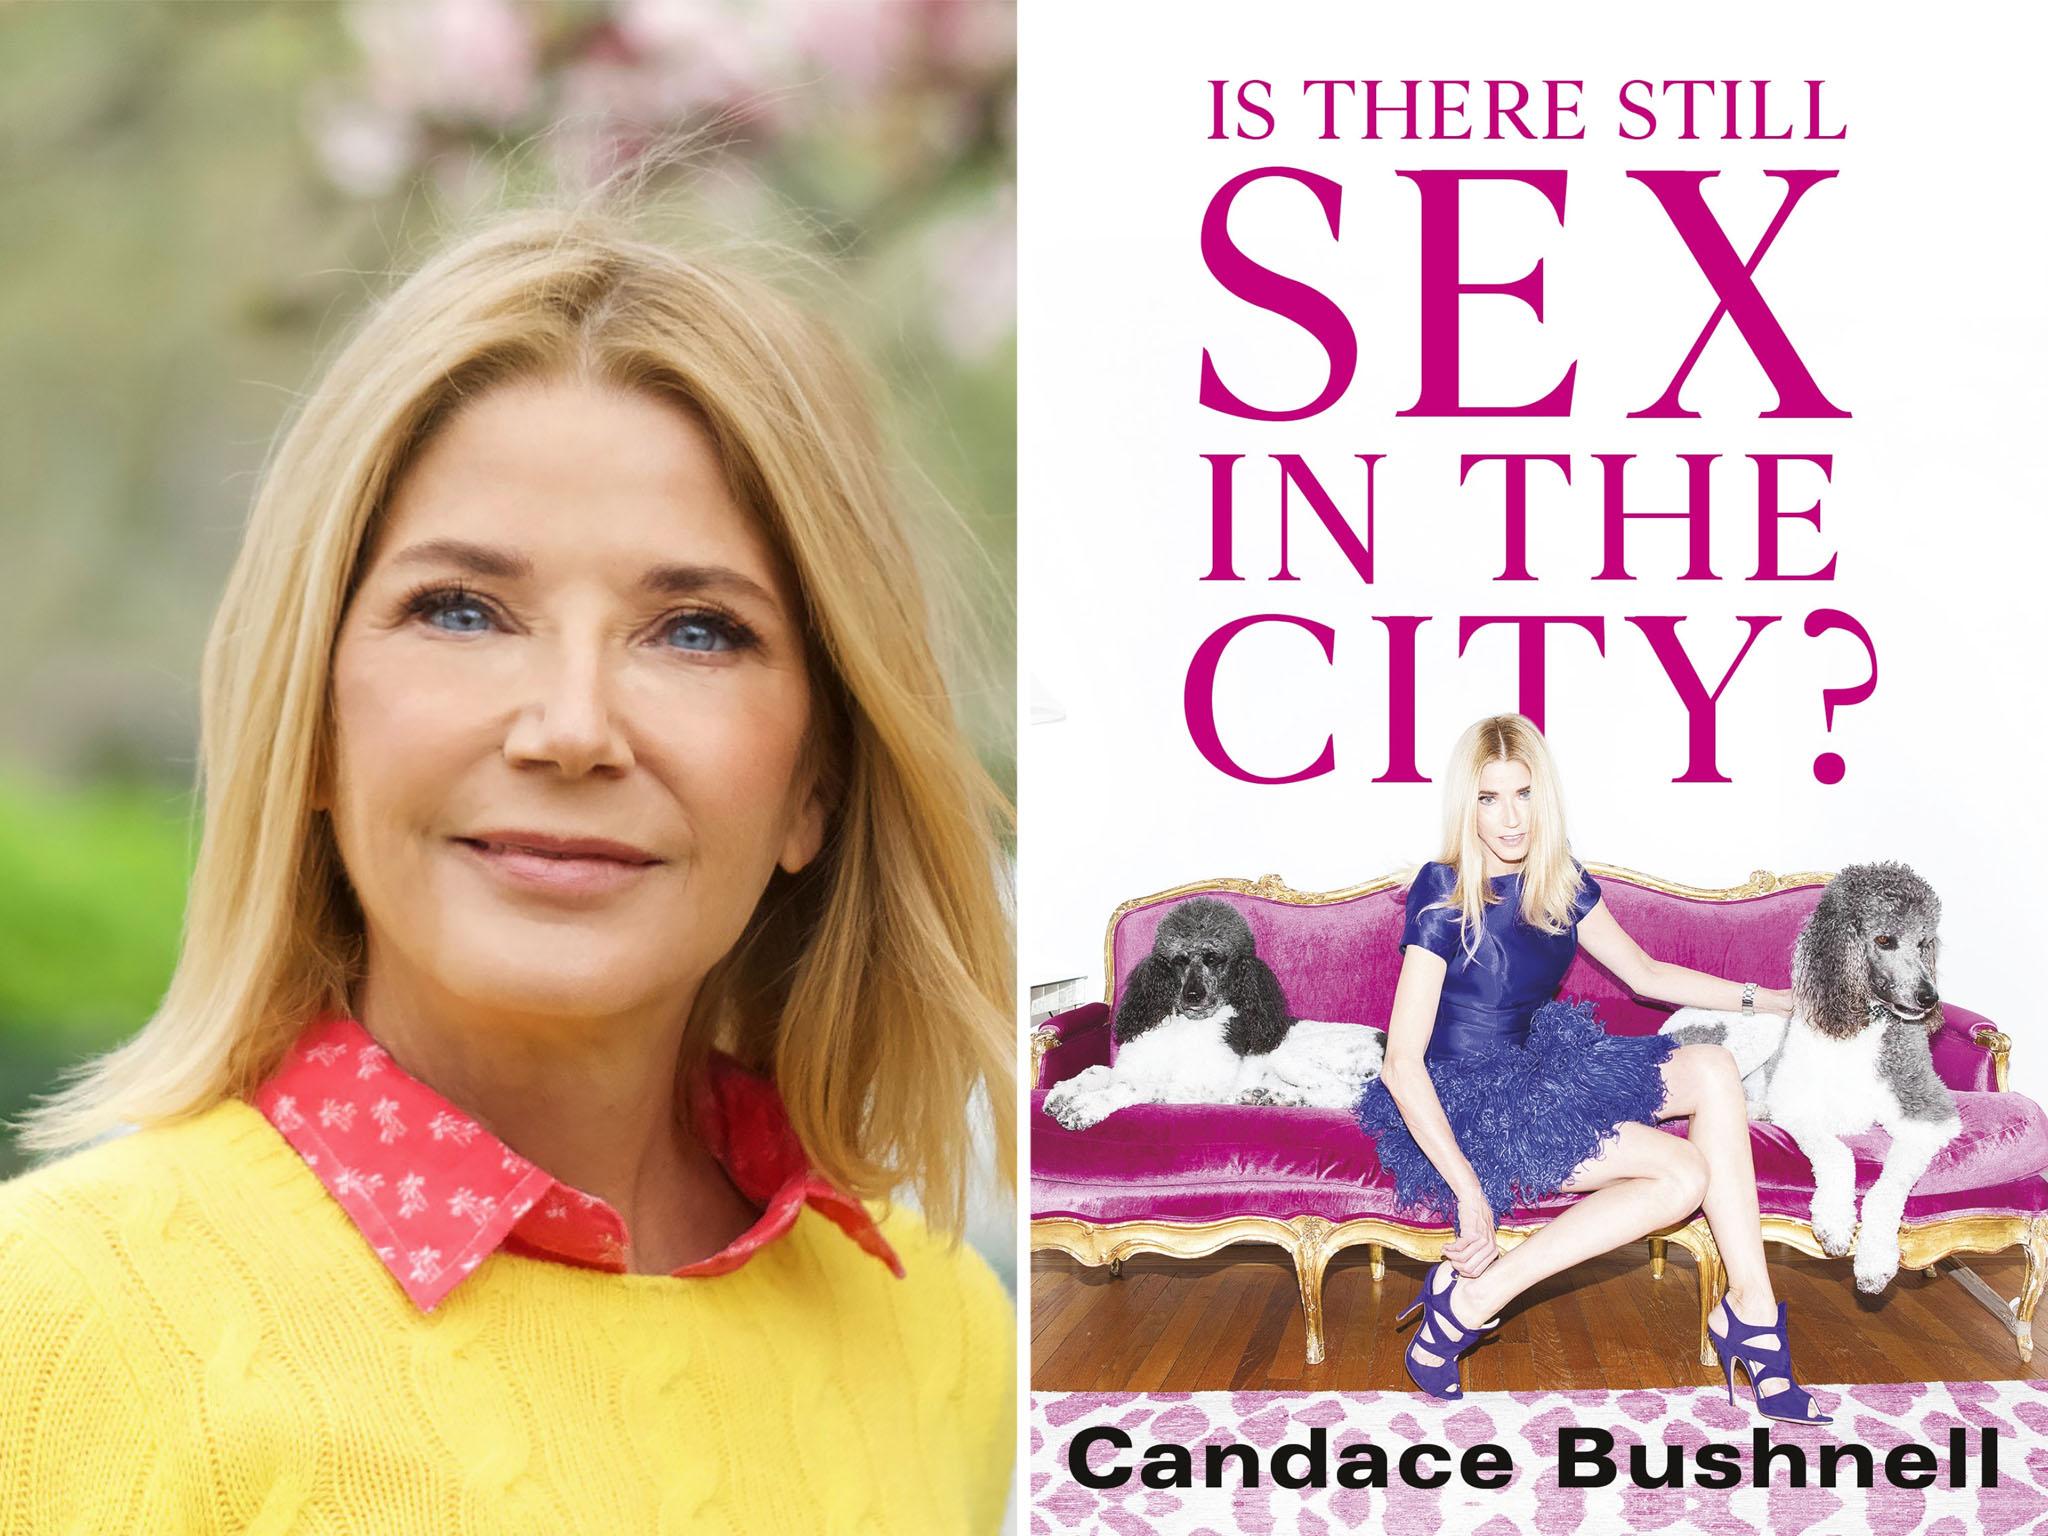 Is There Still Sex in the City? by Candace Bushnell, review Its disconcerting that this former sexpert sounds so out of touch The Independent The Independent